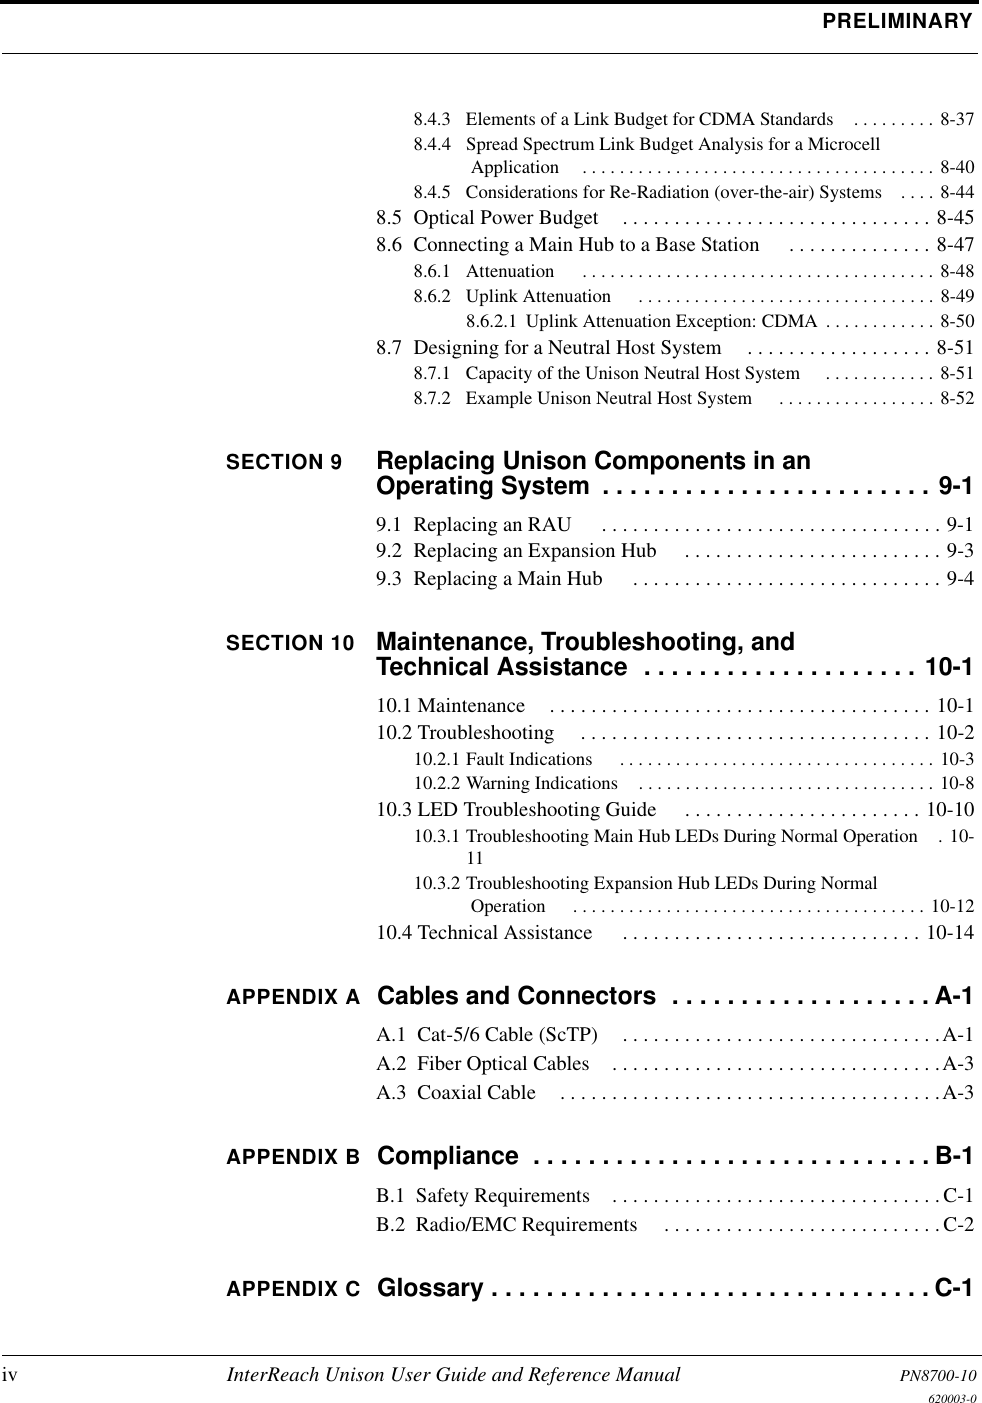 PRELIMINARYiv InterReach Unison User Guide and Reference Manual PN8700-10620003-08.4.3  Elements of a Link Budget for CDMA Standards . . . . . . . . . 8-378.4.4  Spread Spectrum Link Budget Analysis for a Microcell Application . . . . . . . . . . . . . . . . . . . . . . . . . . . . . . . . . . . . . . 8-408.4.5  Considerations for Re-Radiation (over-the-air) Systems . . . . 8-448.5  Optical Power Budget . . . . . . . . . . . . . . . . . . . . . . . . . . . . . . 8-458.6  Connecting a Main Hub to a Base Station  . . . . . . . . . . . . . . 8-478.6.1  Attenuation  . . . . . . . . . . . . . . . . . . . . . . . . . . . . . . . . . . . . . . 8-488.6.2  Uplink Attenuation  . . . . . . . . . . . . . . . . . . . . . . . . . . . . . . . . 8-498.6.2.1  Uplink Attenuation Exception: CDMA . . . . . . . . . . . . 8-508.7  Designing for a Neutral Host System . . . . . . . . . . . . . . . . . . 8-518.7.1  Capacity of the Unison Neutral Host System  . . . . . . . . . . . . 8-518.7.2  Example Unison Neutral Host System  . . . . . . . . . . . . . . . . . 8-52SECTION 9 Replacing Unison Components in an Operating System  . . . . . . . . . . . . . . . . . . . . . . . . 9-19.1  Replacing an RAU  . . . . . . . . . . . . . . . . . . . . . . . . . . . . . . . . . 9-19.2  Replacing an Expansion Hub  . . . . . . . . . . . . . . . . . . . . . . . . . 9-39.3  Replacing a Main Hub  . . . . . . . . . . . . . . . . . . . . . . . . . . . . . . 9-4SECTION 10 Maintenance, Troubleshooting, and Technical Assistance  . . . . . . . . . . . . . . . . . . . . 10-110.1 Maintenance . . . . . . . . . . . . . . . . . . . . . . . . . . . . . . . . . . . . . 10-110.2 Troubleshooting  . . . . . . . . . . . . . . . . . . . . . . . . . . . . . . . . . . 10-210.2.1 Fault Indications  . . . . . . . . . . . . . . . . . . . . . . . . . . . . . . . . . . 10-310.2.2 Warning Indications . . . . . . . . . . . . . . . . . . . . . . . . . . . . . . . . 10-810.3 LED Troubleshooting Guide  . . . . . . . . . . . . . . . . . . . . . . . 10-1010.3.1 Troubleshooting Main Hub LEDs During Normal Operation . 10-1110.3.2 Troubleshooting Expansion Hub LEDs During Normal Operation  . . . . . . . . . . . . . . . . . . . . . . . . . . . . . . . . . . . . . . 10-1210.4 Technical Assistance  . . . . . . . . . . . . . . . . . . . . . . . . . . . . . 10-14APPENDIX A Cables and Connectors  . . . . . . . . . . . . . . . . . . . A-1A.1  Cat-5/6 Cable (ScTP) . . . . . . . . . . . . . . . . . . . . . . . . . . . . . . .A-1A.2  Fiber Optical Cables . . . . . . . . . . . . . . . . . . . . . . . . . . . . . . . .A-3A.3  Coaxial Cable . . . . . . . . . . . . . . . . . . . . . . . . . . . . . . . . . . . . .A-3APPENDIX B Compliance  . . . . . . . . . . . . . . . . . . . . . . . . . . . . . B-1B.1  Safety Requirements . . . . . . . . . . . . . . . . . . . . . . . . . . . . . . . . C-1B.2  Radio/EMC Requirements  . . . . . . . . . . . . . . . . . . . . . . . . . . .C-2APPENDIX C Glossary . . . . . . . . . . . . . . . . . . . . . . . . . . . . . . . . C-1